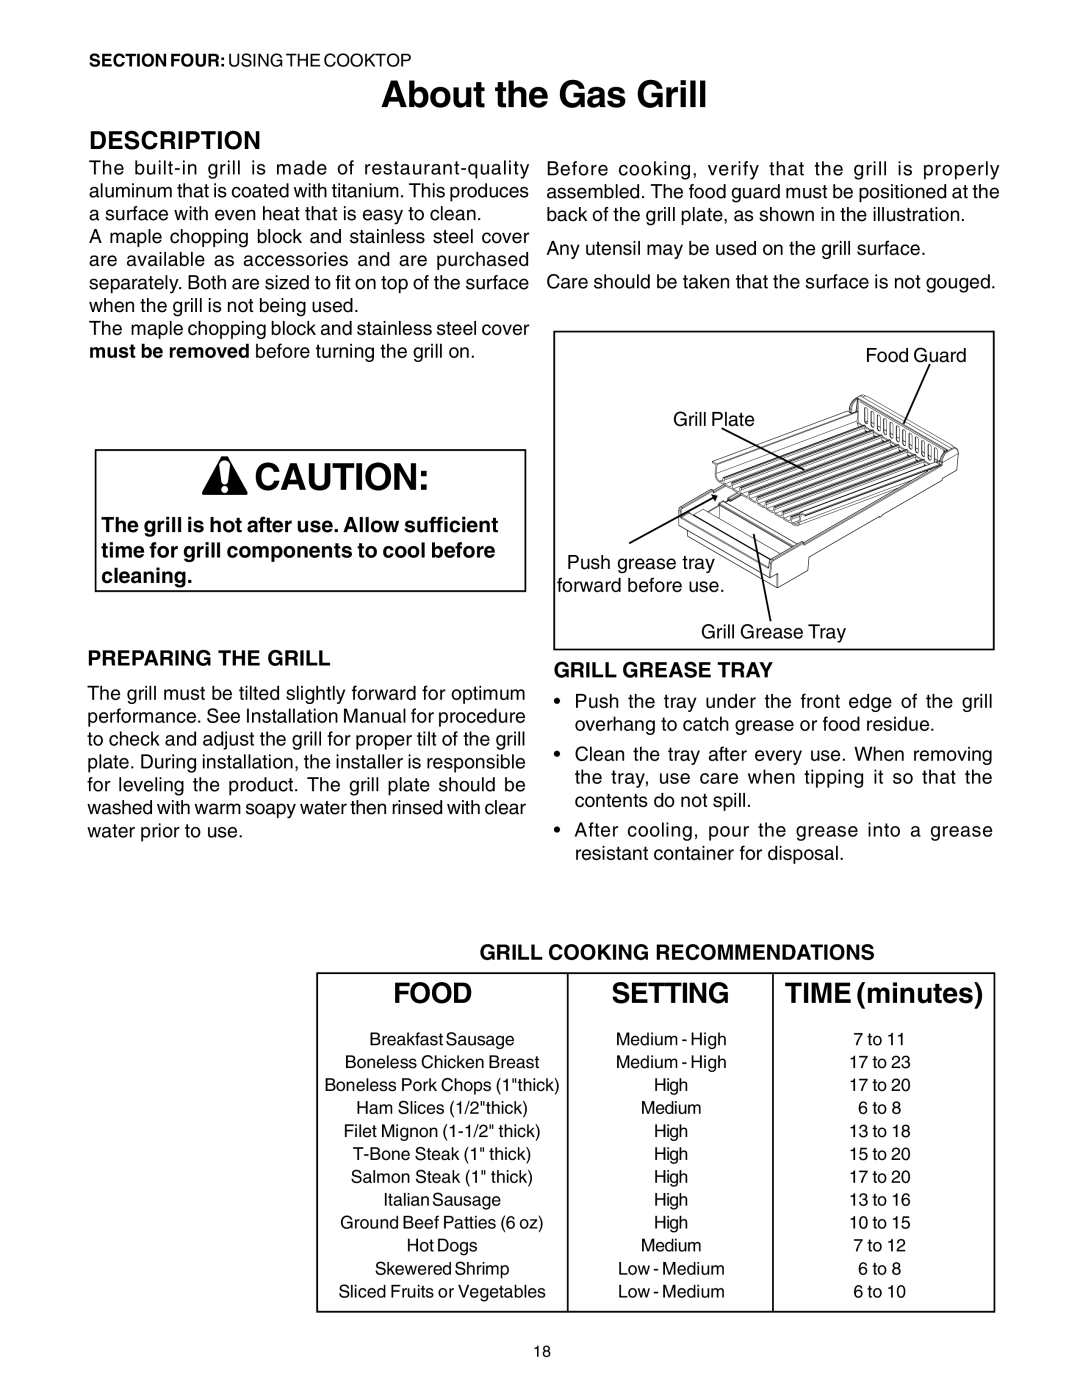 Thermador DP30 manual About the Gas Grill, Food, Setting, TIME minutes, Description, Preparing The Grill, Grill Grease Tray 